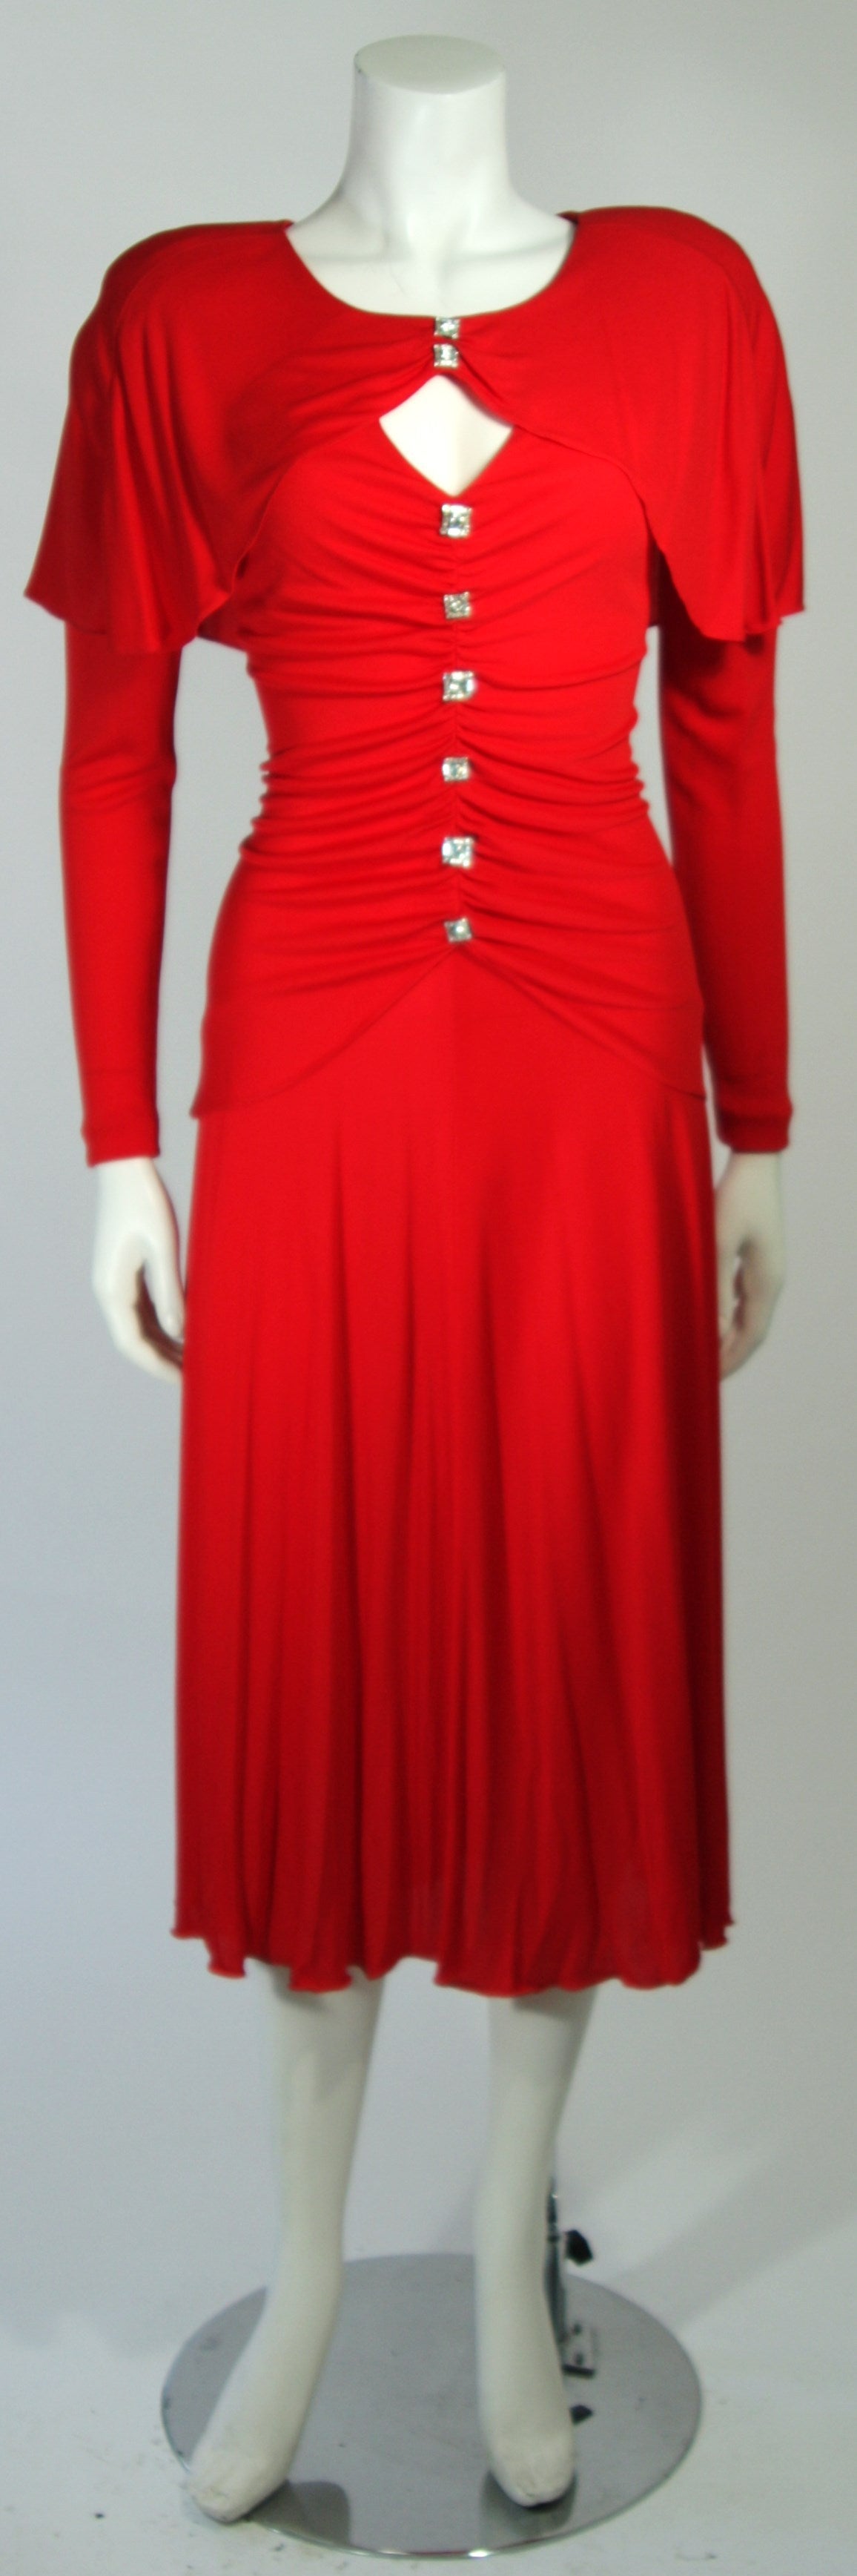 This Holly Harp cocktail dress is fashioned from a superb red jersey. Featuring rhinestone buttons, ruching, and long sleeves, this dress offers a complementing fit. Padded shoulders. In excellent condition.

**Please cross-reference measurements